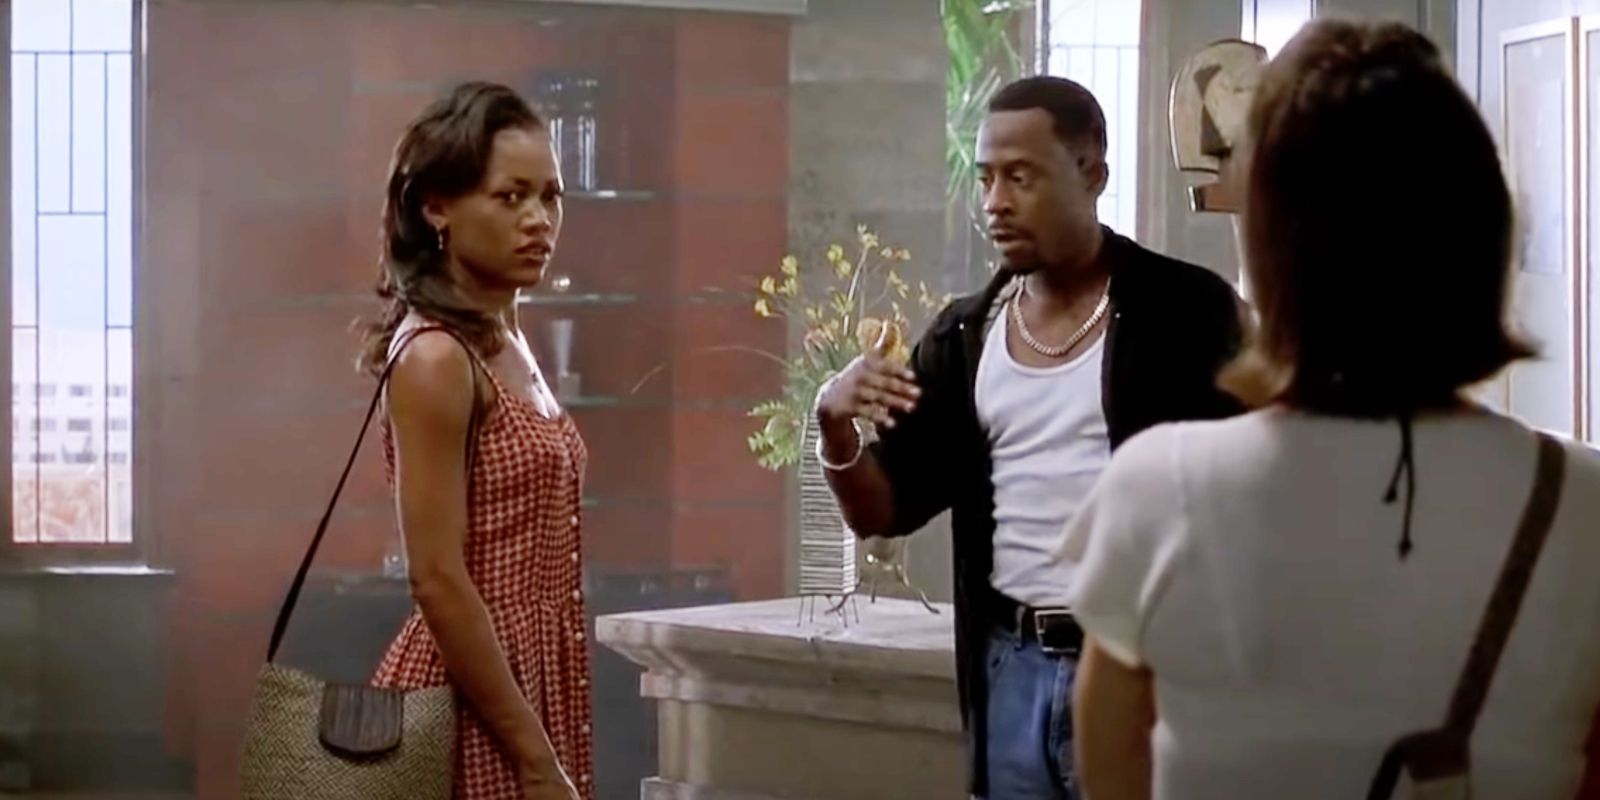 Theresa Burnett and Marcus arguing in front of woman in Bad Boys